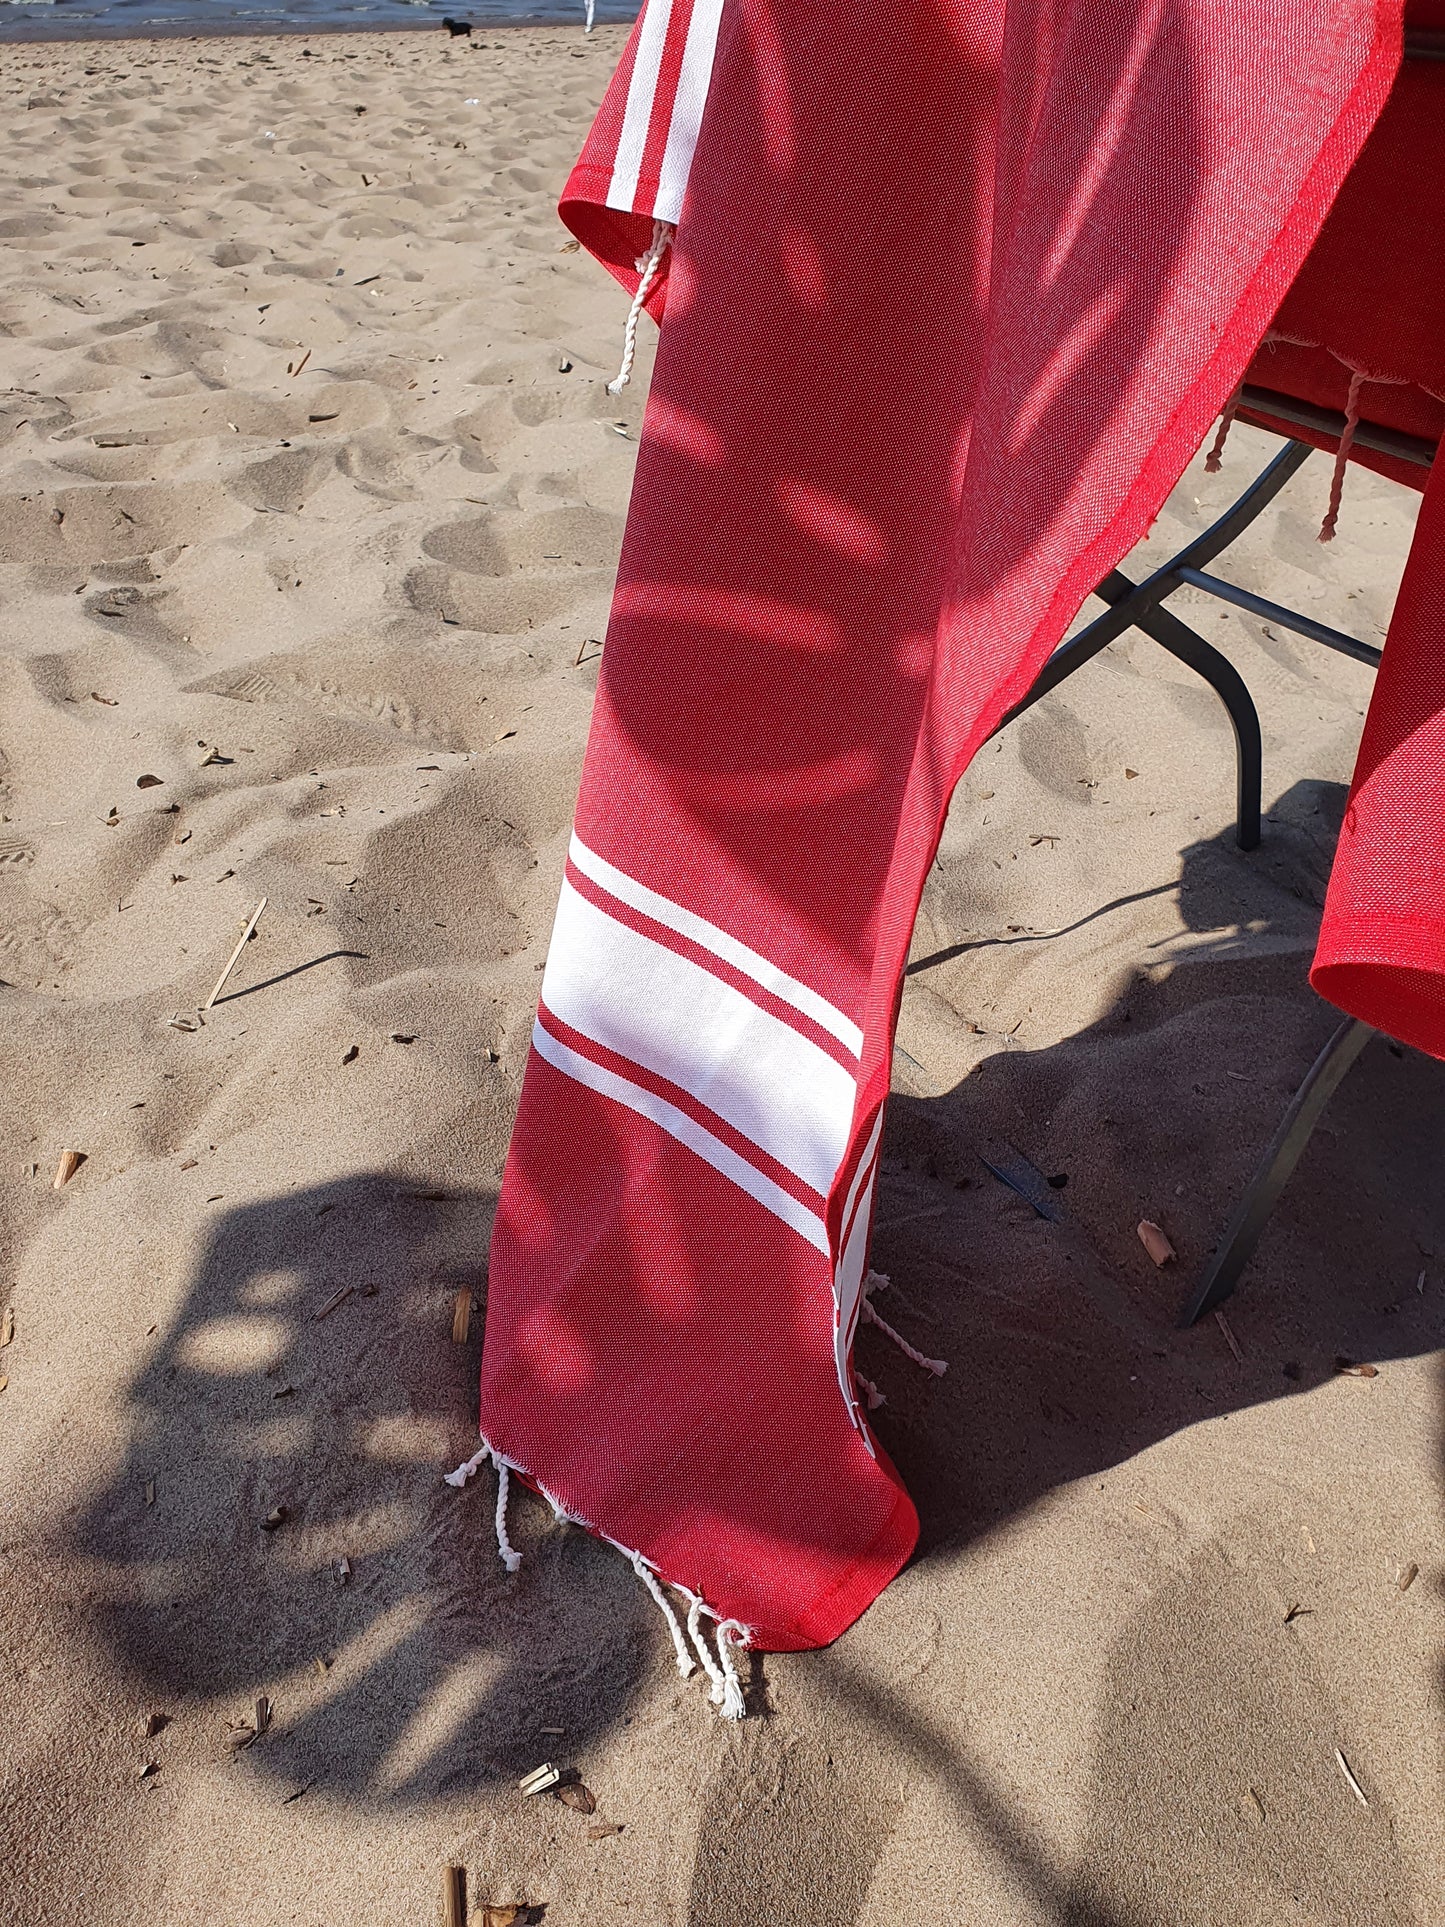 STRANDLIV Fouta Classic Real Red.